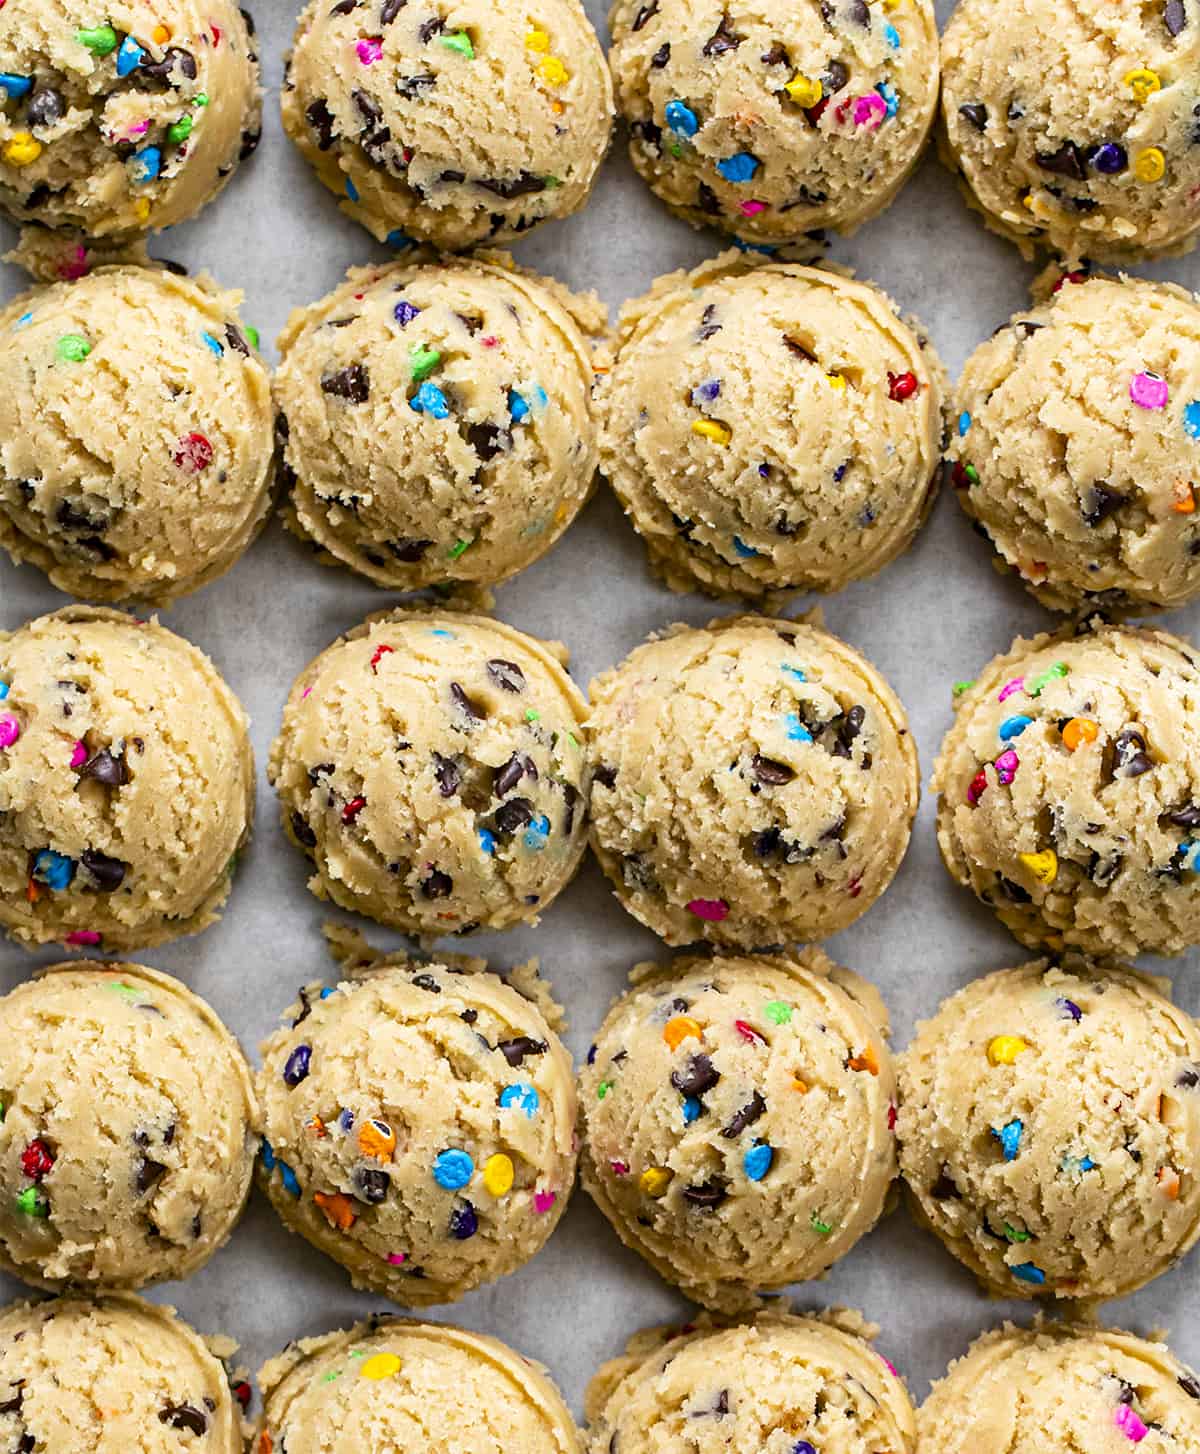 Raw Cookie Dough Batter on a Sheet Pan Before Being Baked. Rainbow Chip Cookie Dough Balls. Baking, Cookies, Cookie Recipes, Dessert, Rainbow Chip, Rainbow Cookies, Rainbow Chip Chocolate Chip Cookies, Soft Cookies, Chewy Cookies, Cookie Dough, i am baker, iambaker